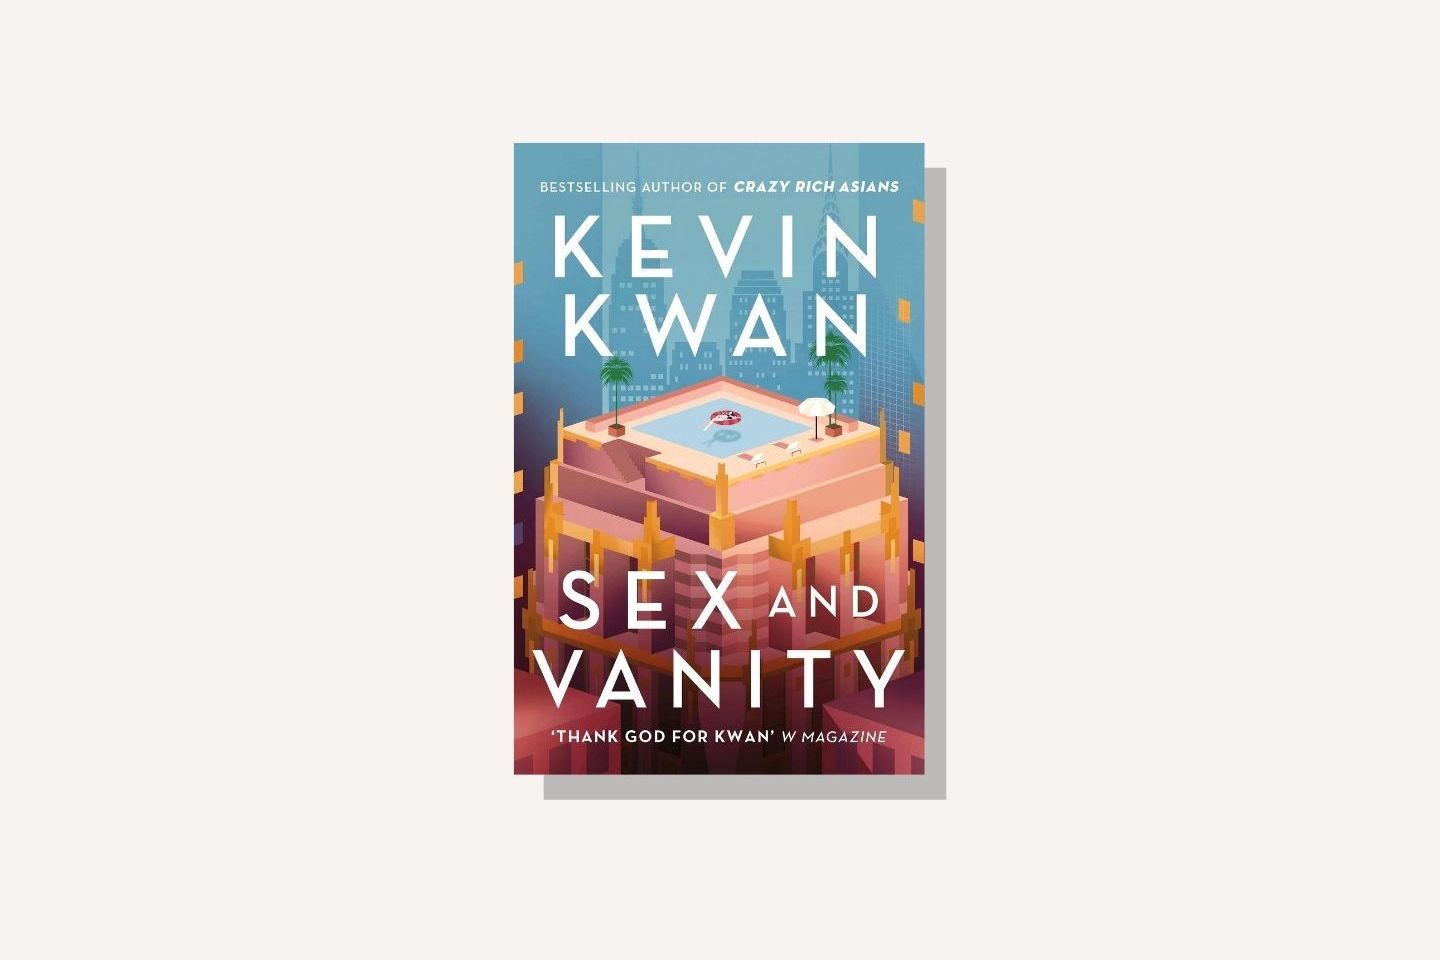 Sex and Vanity Kevin Kwans latest rom-com features new crazy rich characters Options, The Edge